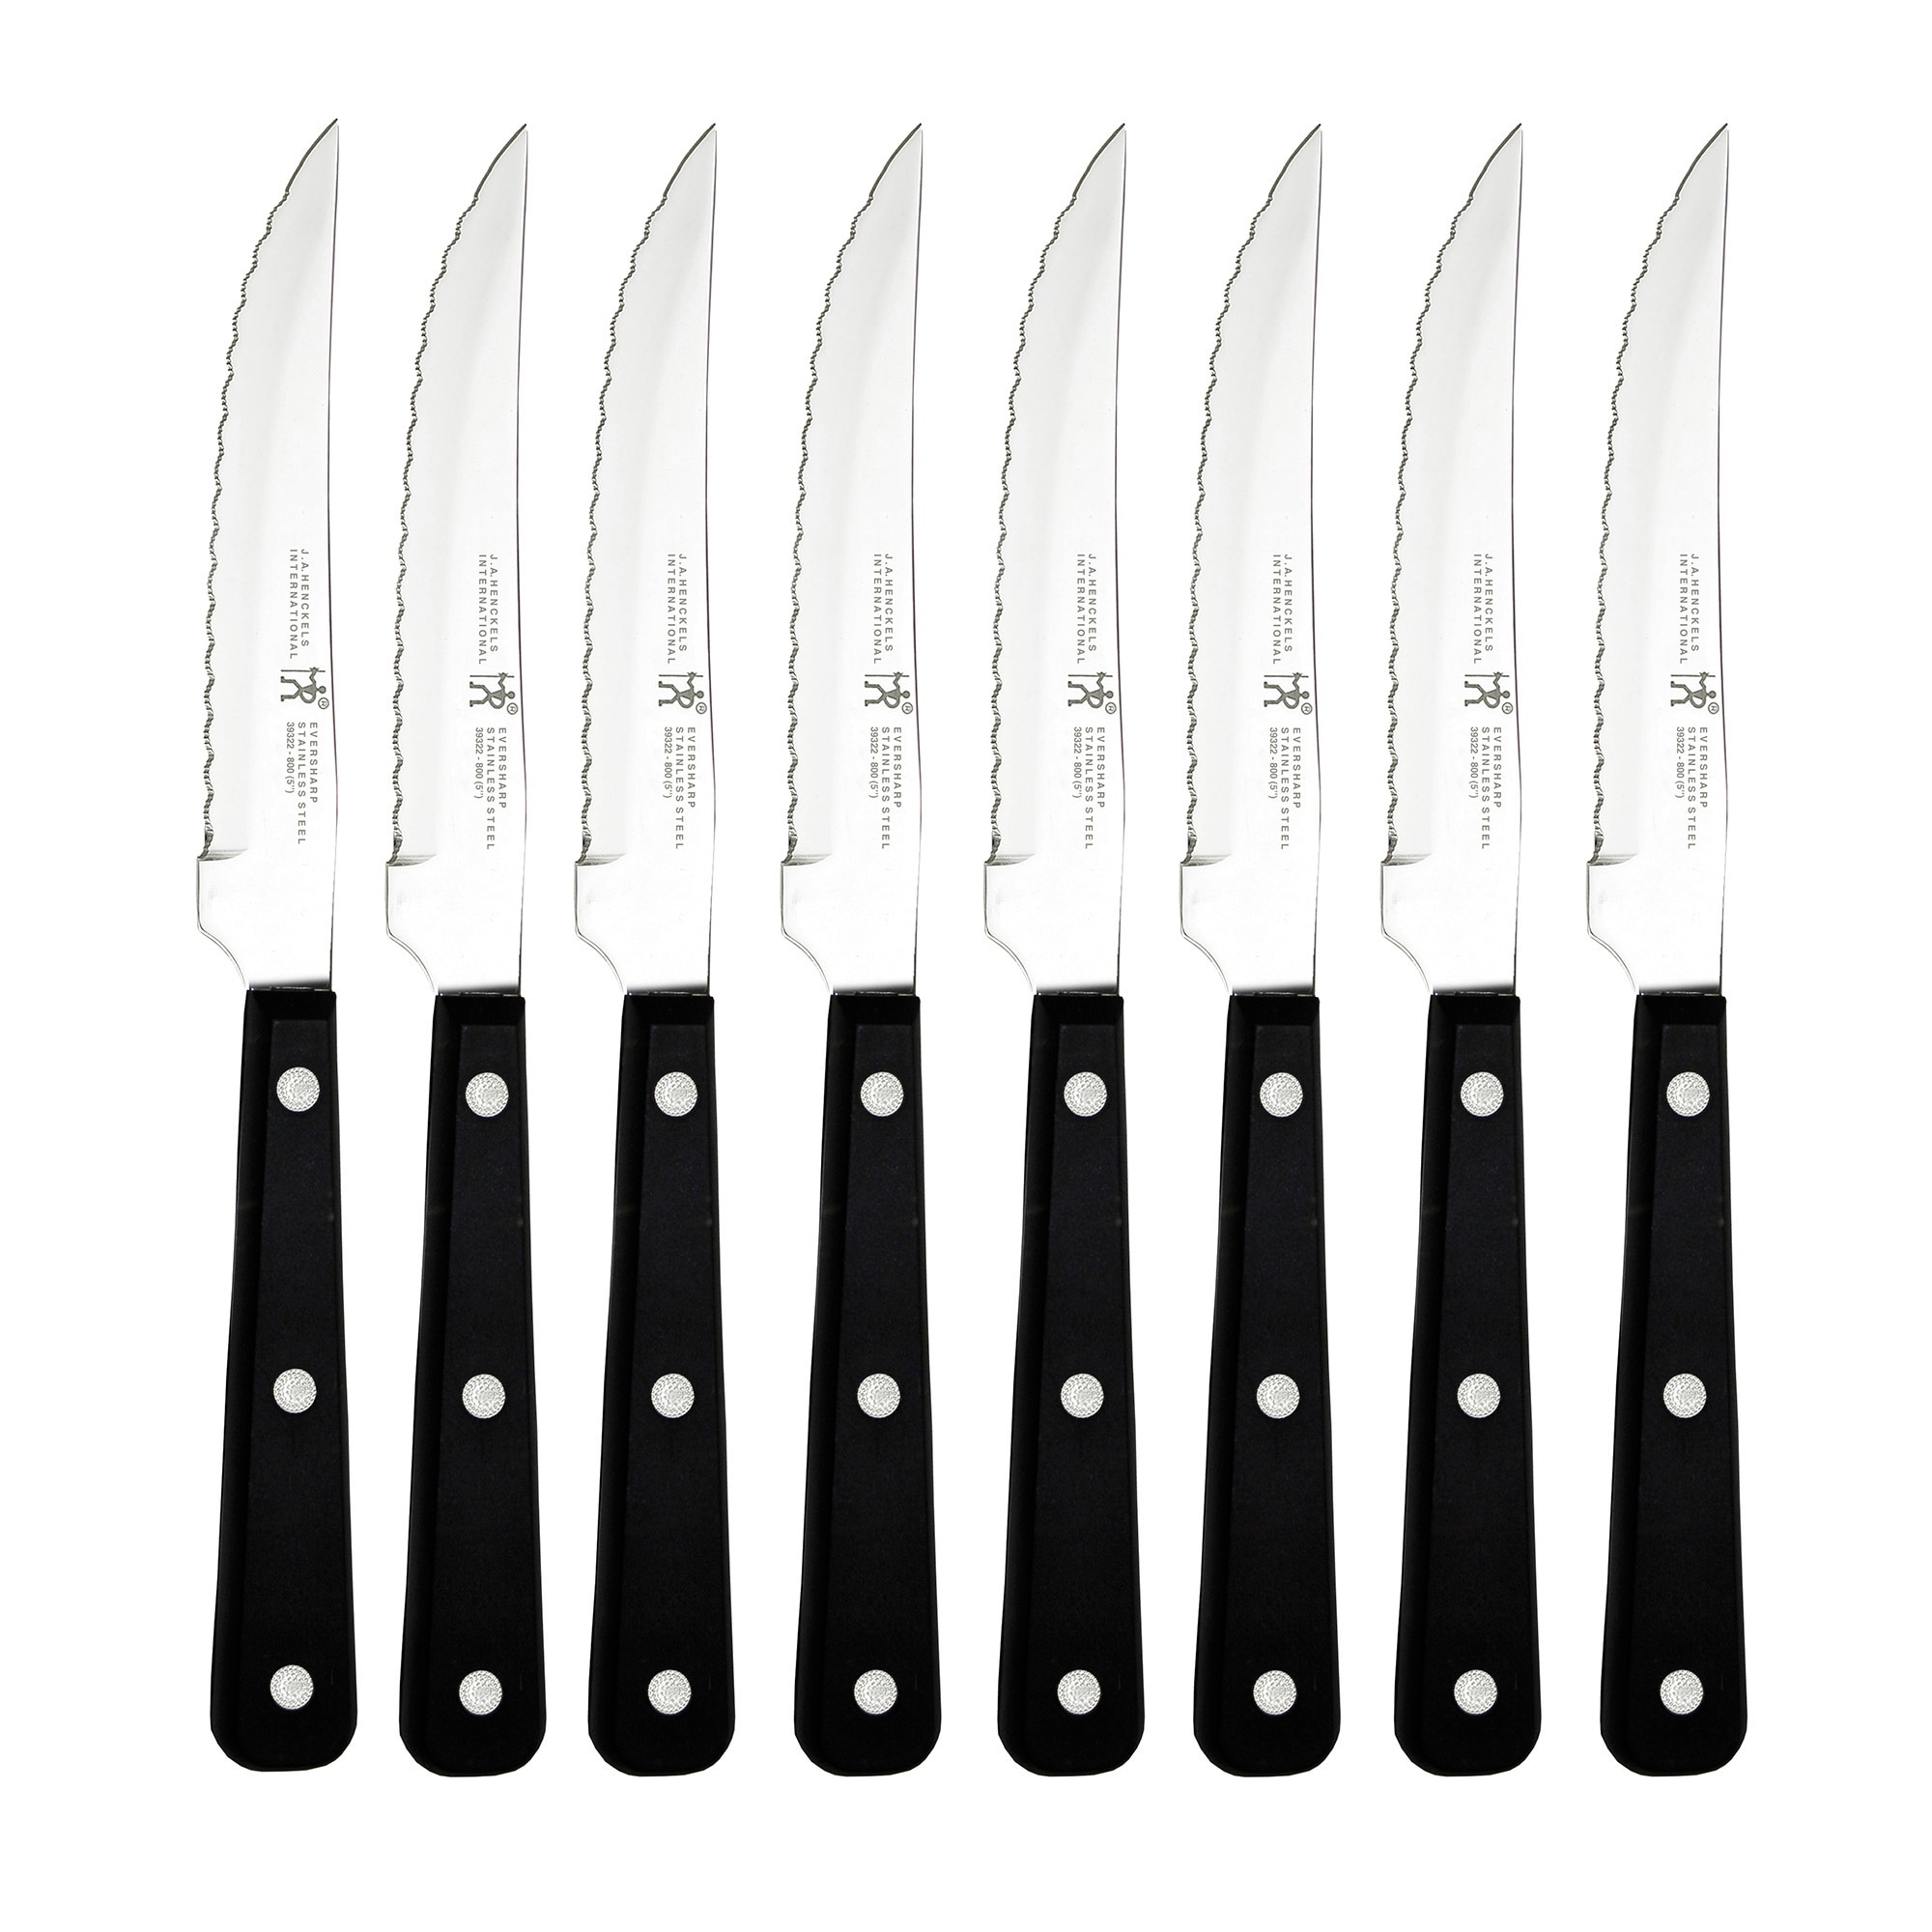 Titanium Professional 2 Stainless Steel Knives Set of 8